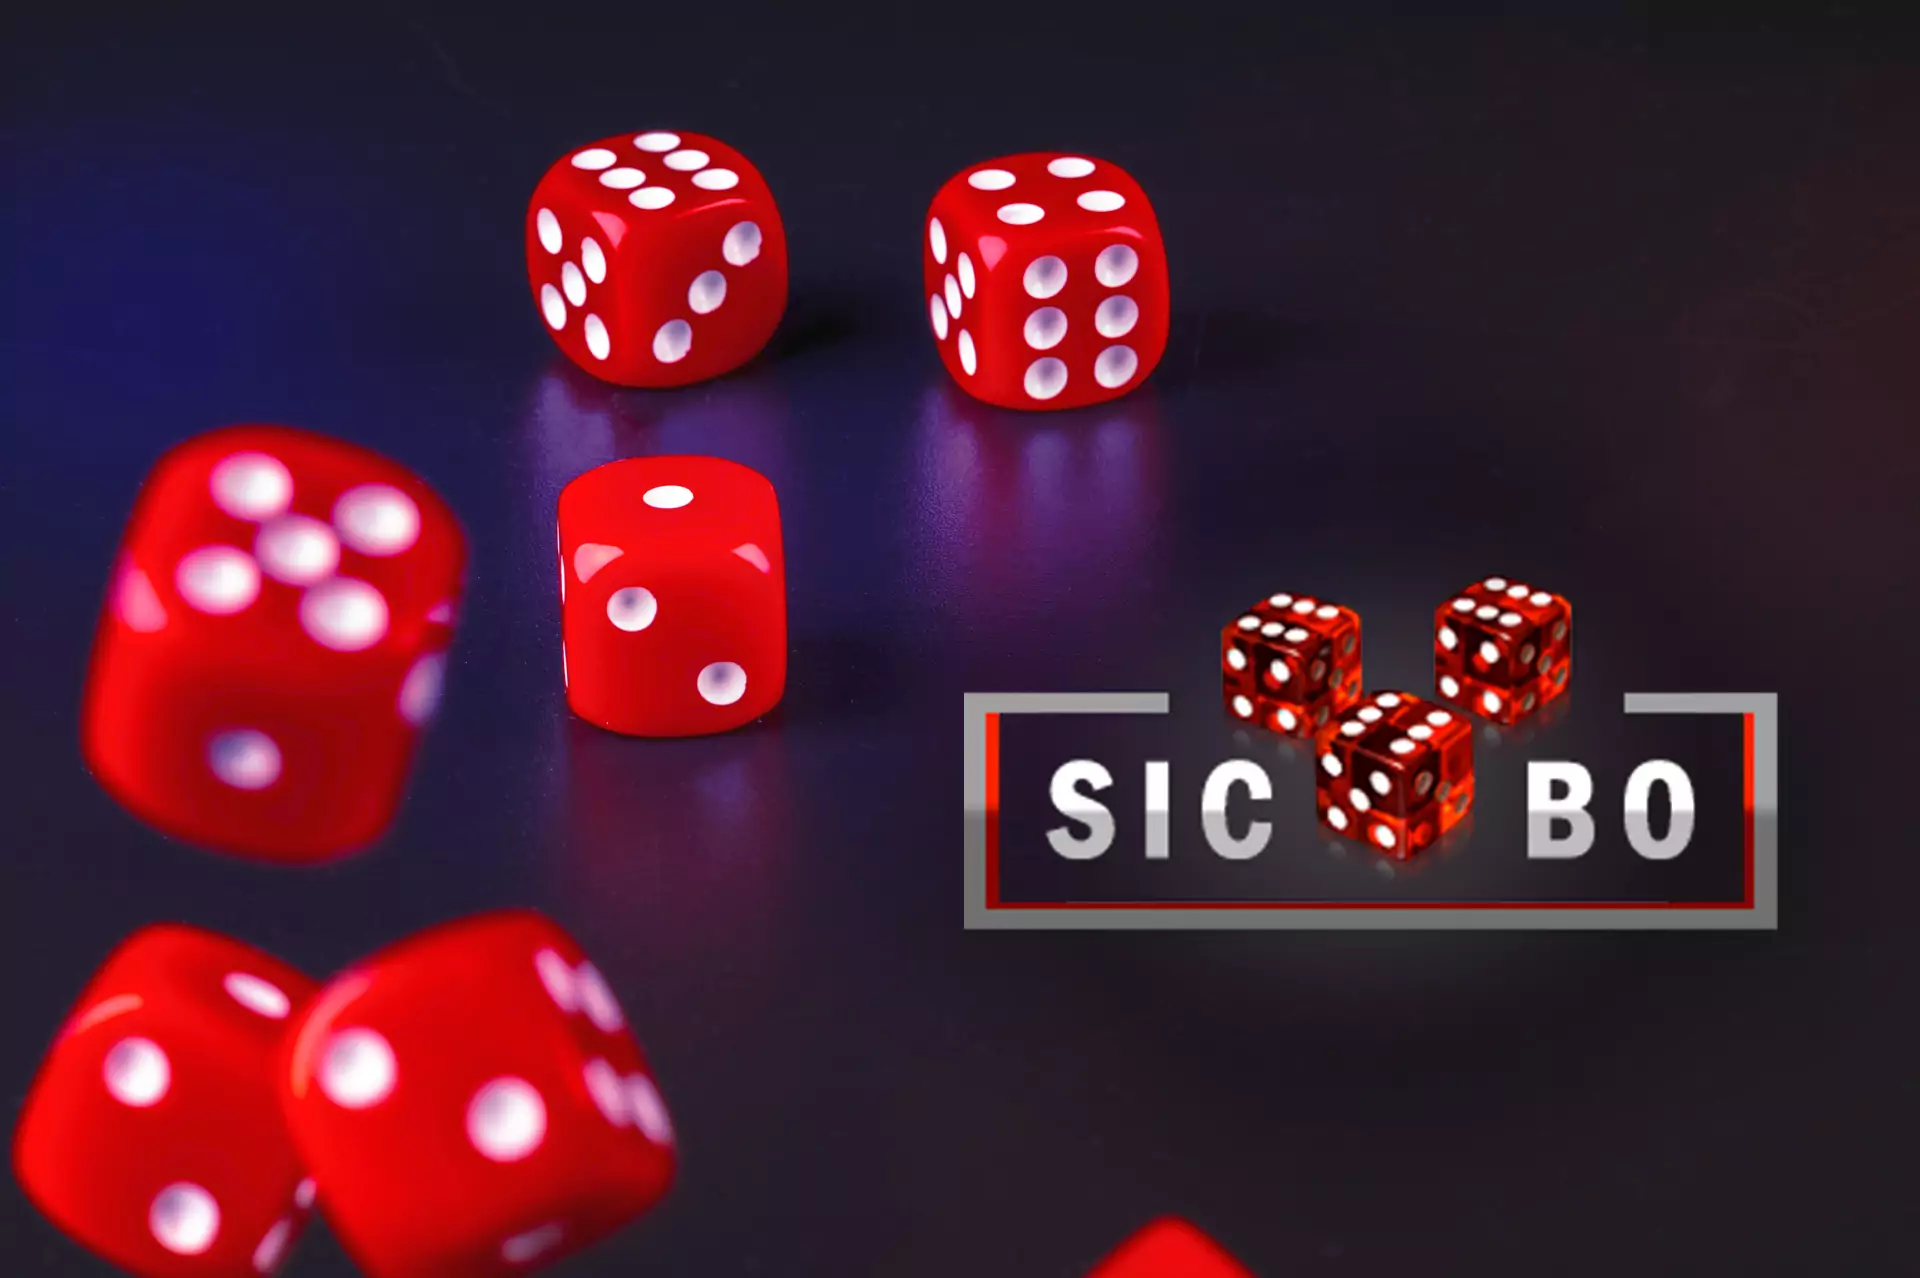 Sic Bo is a game of pure chance but is also quite popular at online casinos.